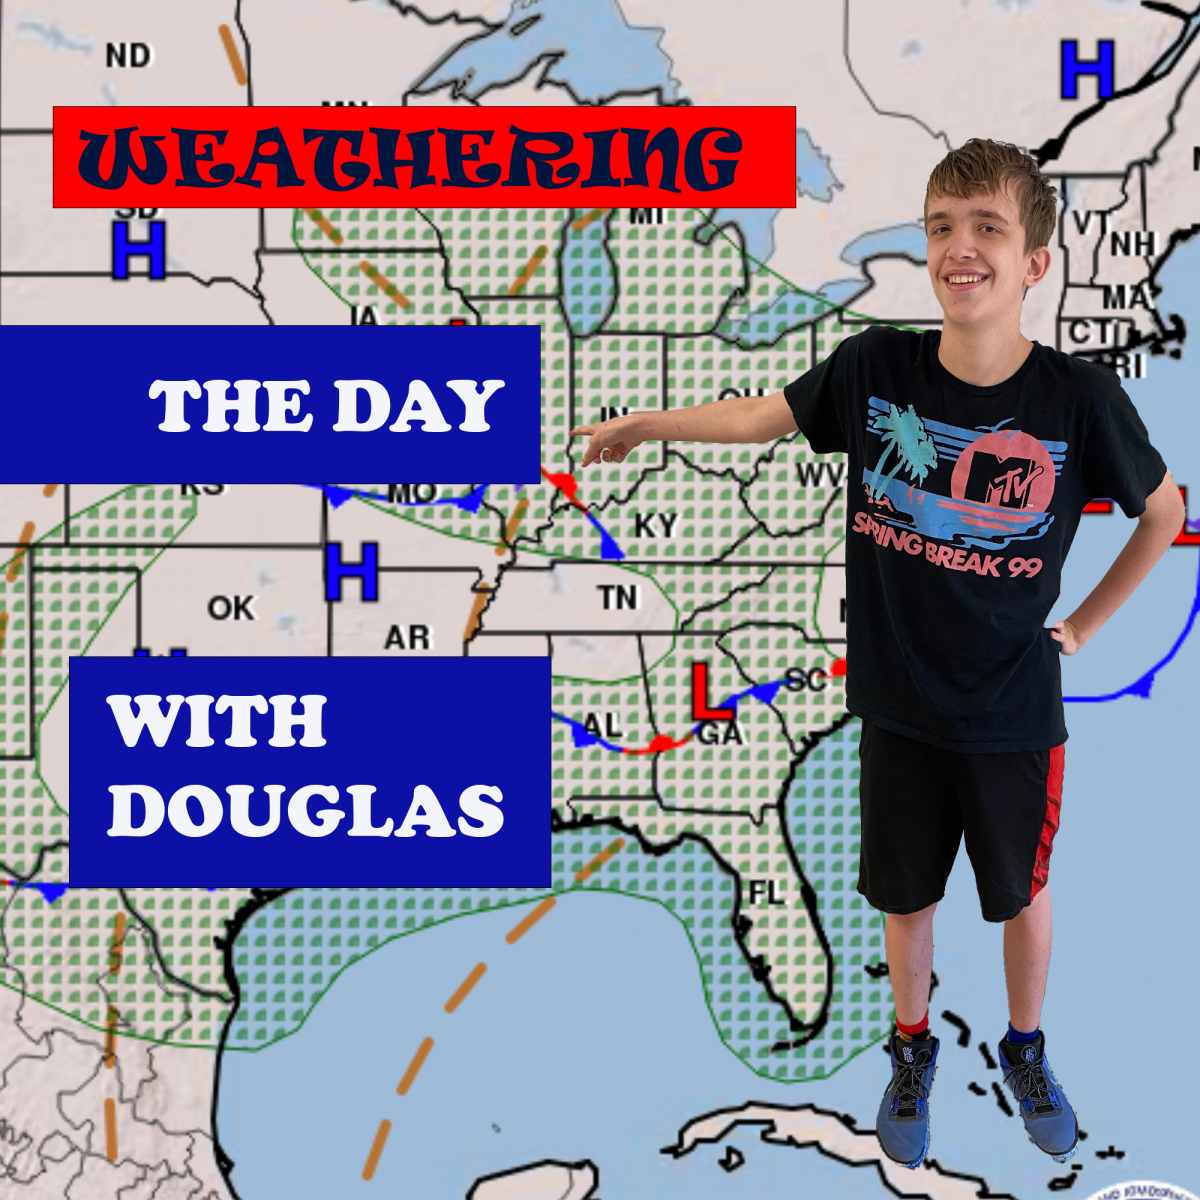 Weathering+the+Day+With+Douglas